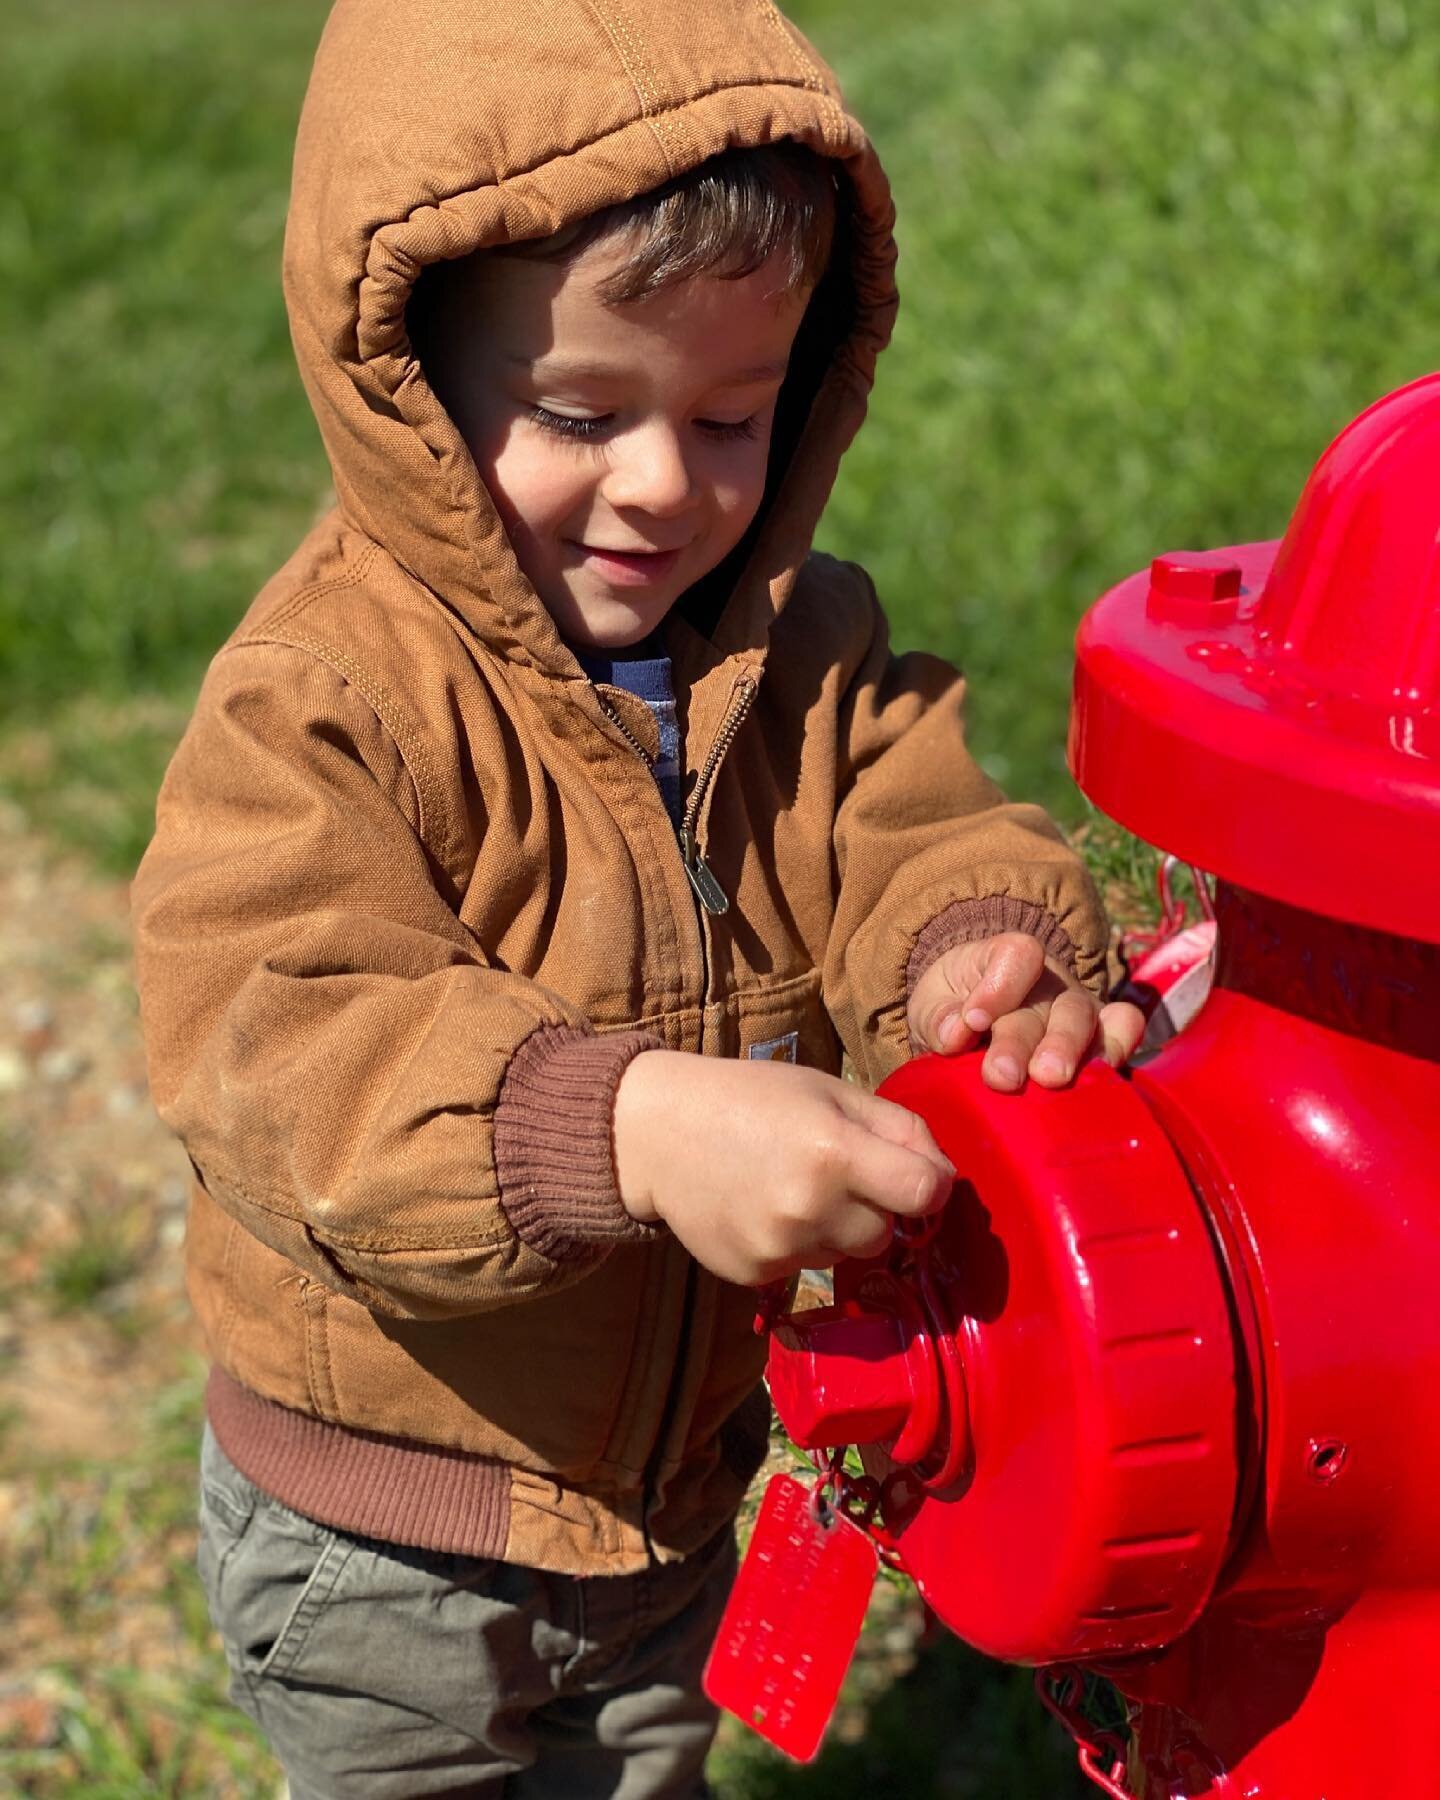 Just a boy, a shiny new fire hydrant, and a tractor.